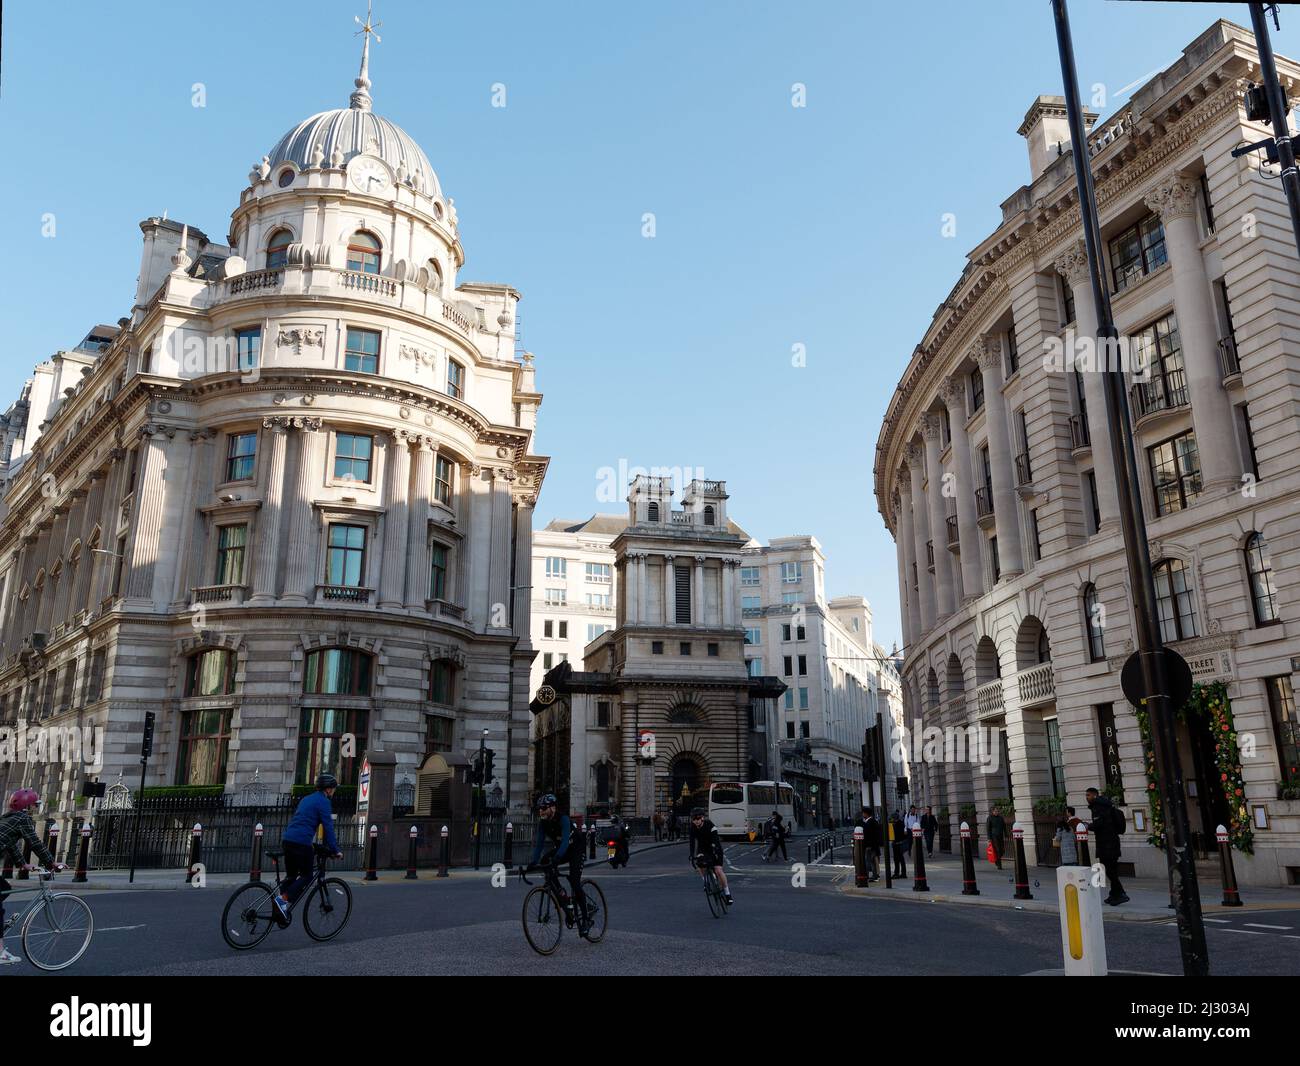 Cyclists at a crossroads or intersection with Bank tube station behind and various buildings either side, London. Stock Photo